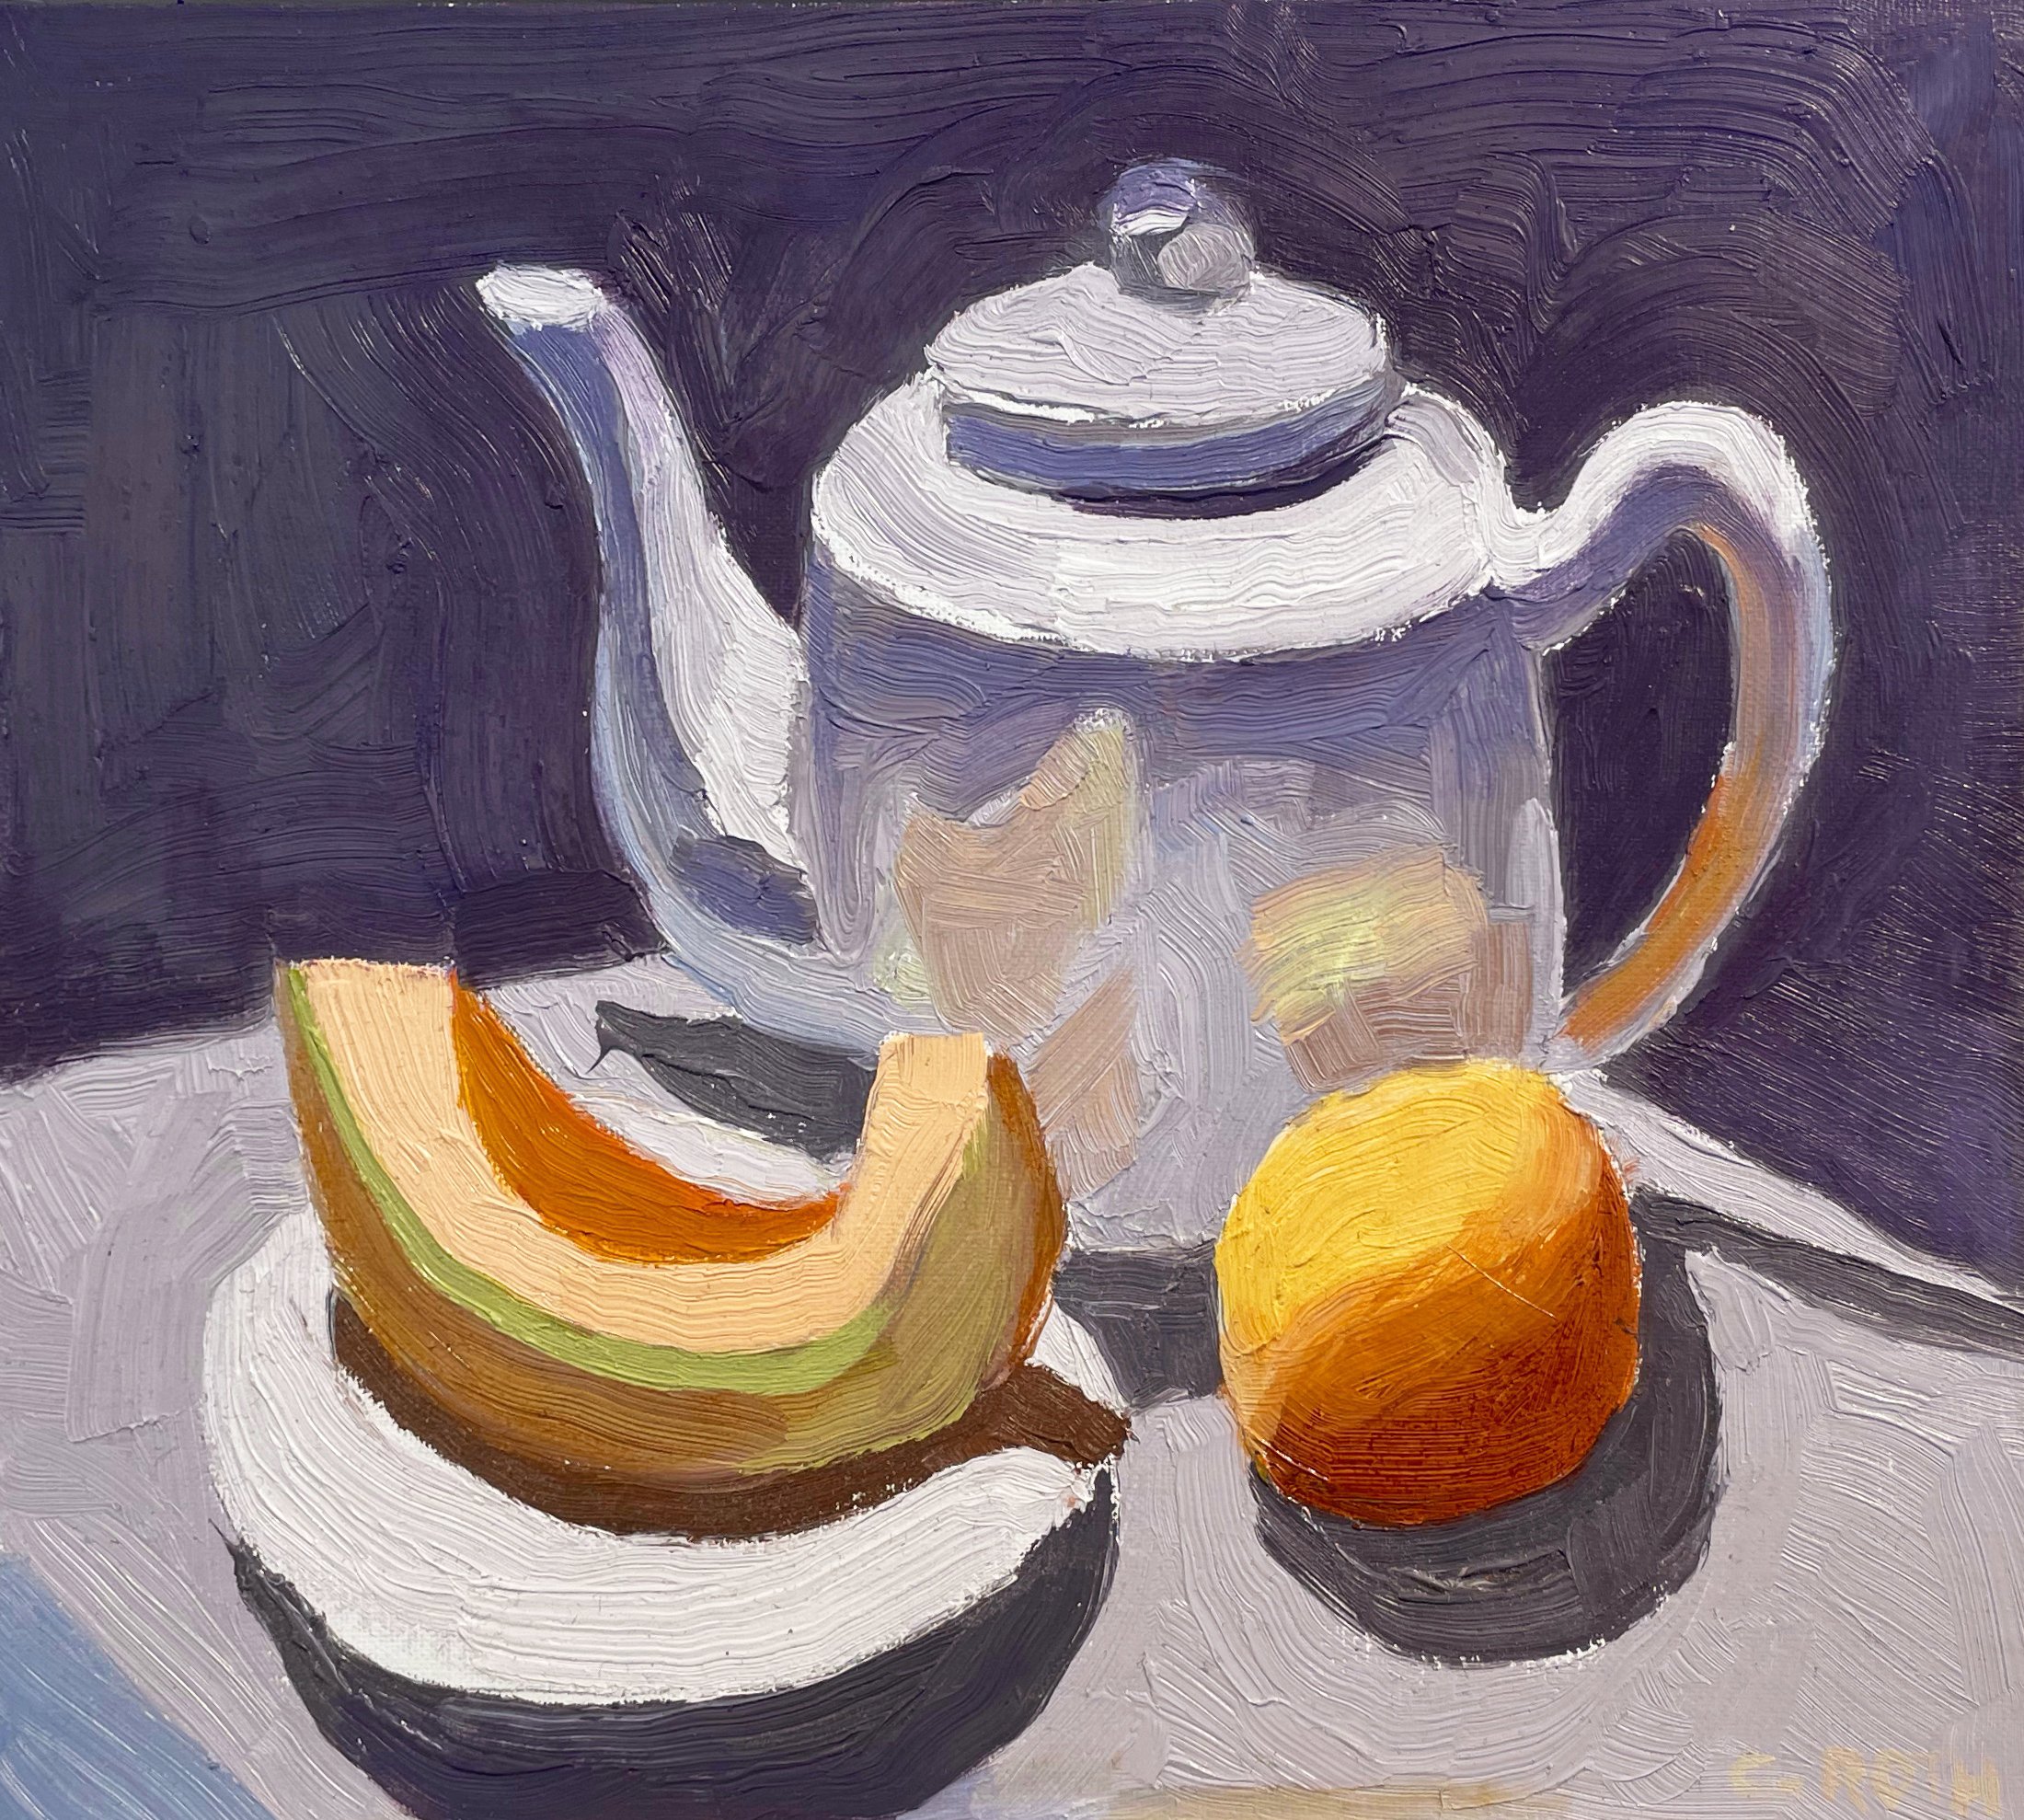 Time for Tea by Carla Roth